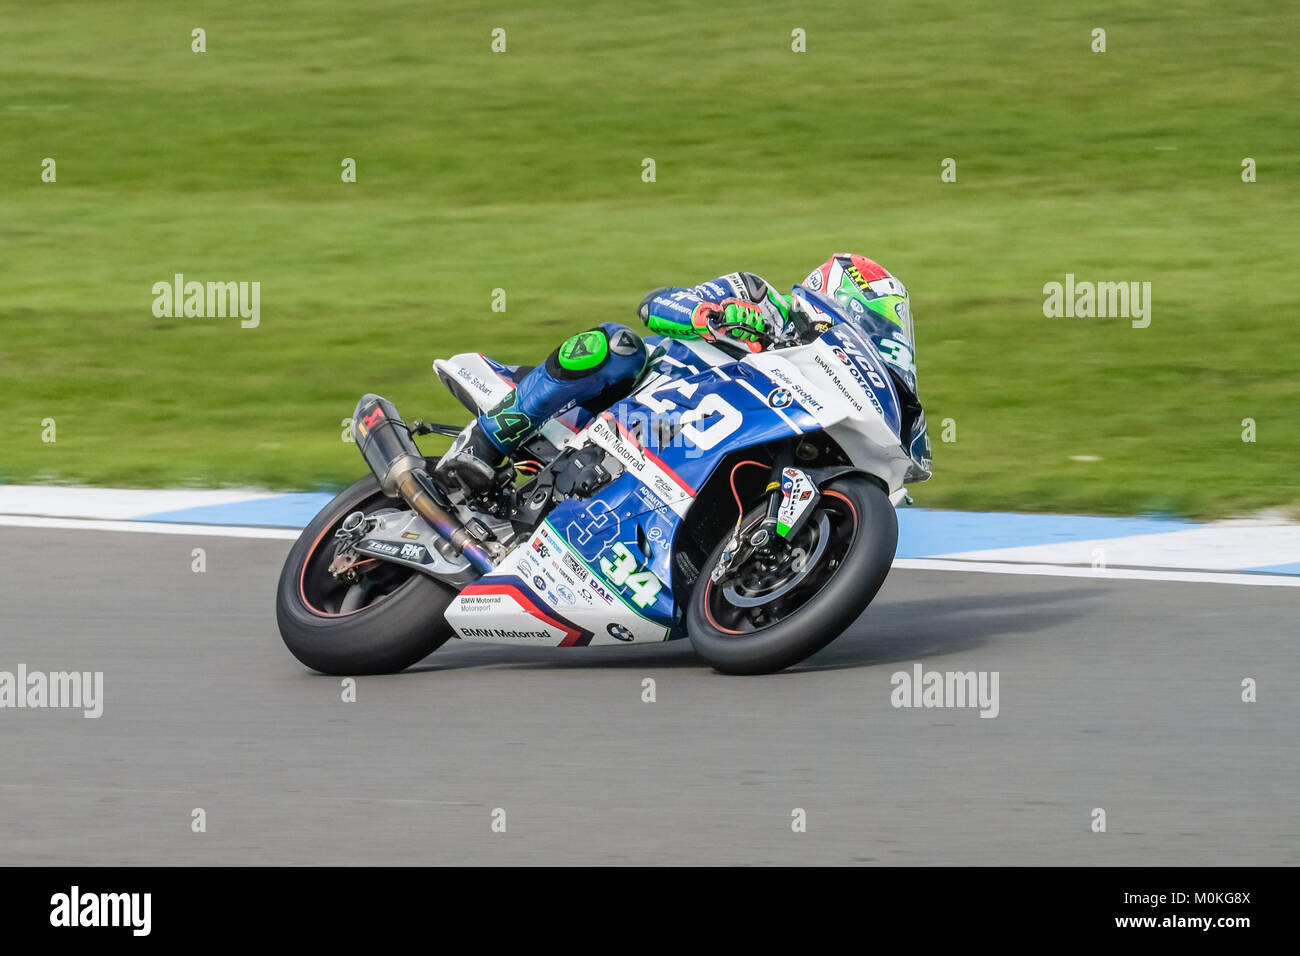 Davide Giugliano on the Motorrad Tyco BMW at the British Superbike Meeting at Donington Park, Castle Donnington, Leicestershire, England in April 2017 Stock Photo